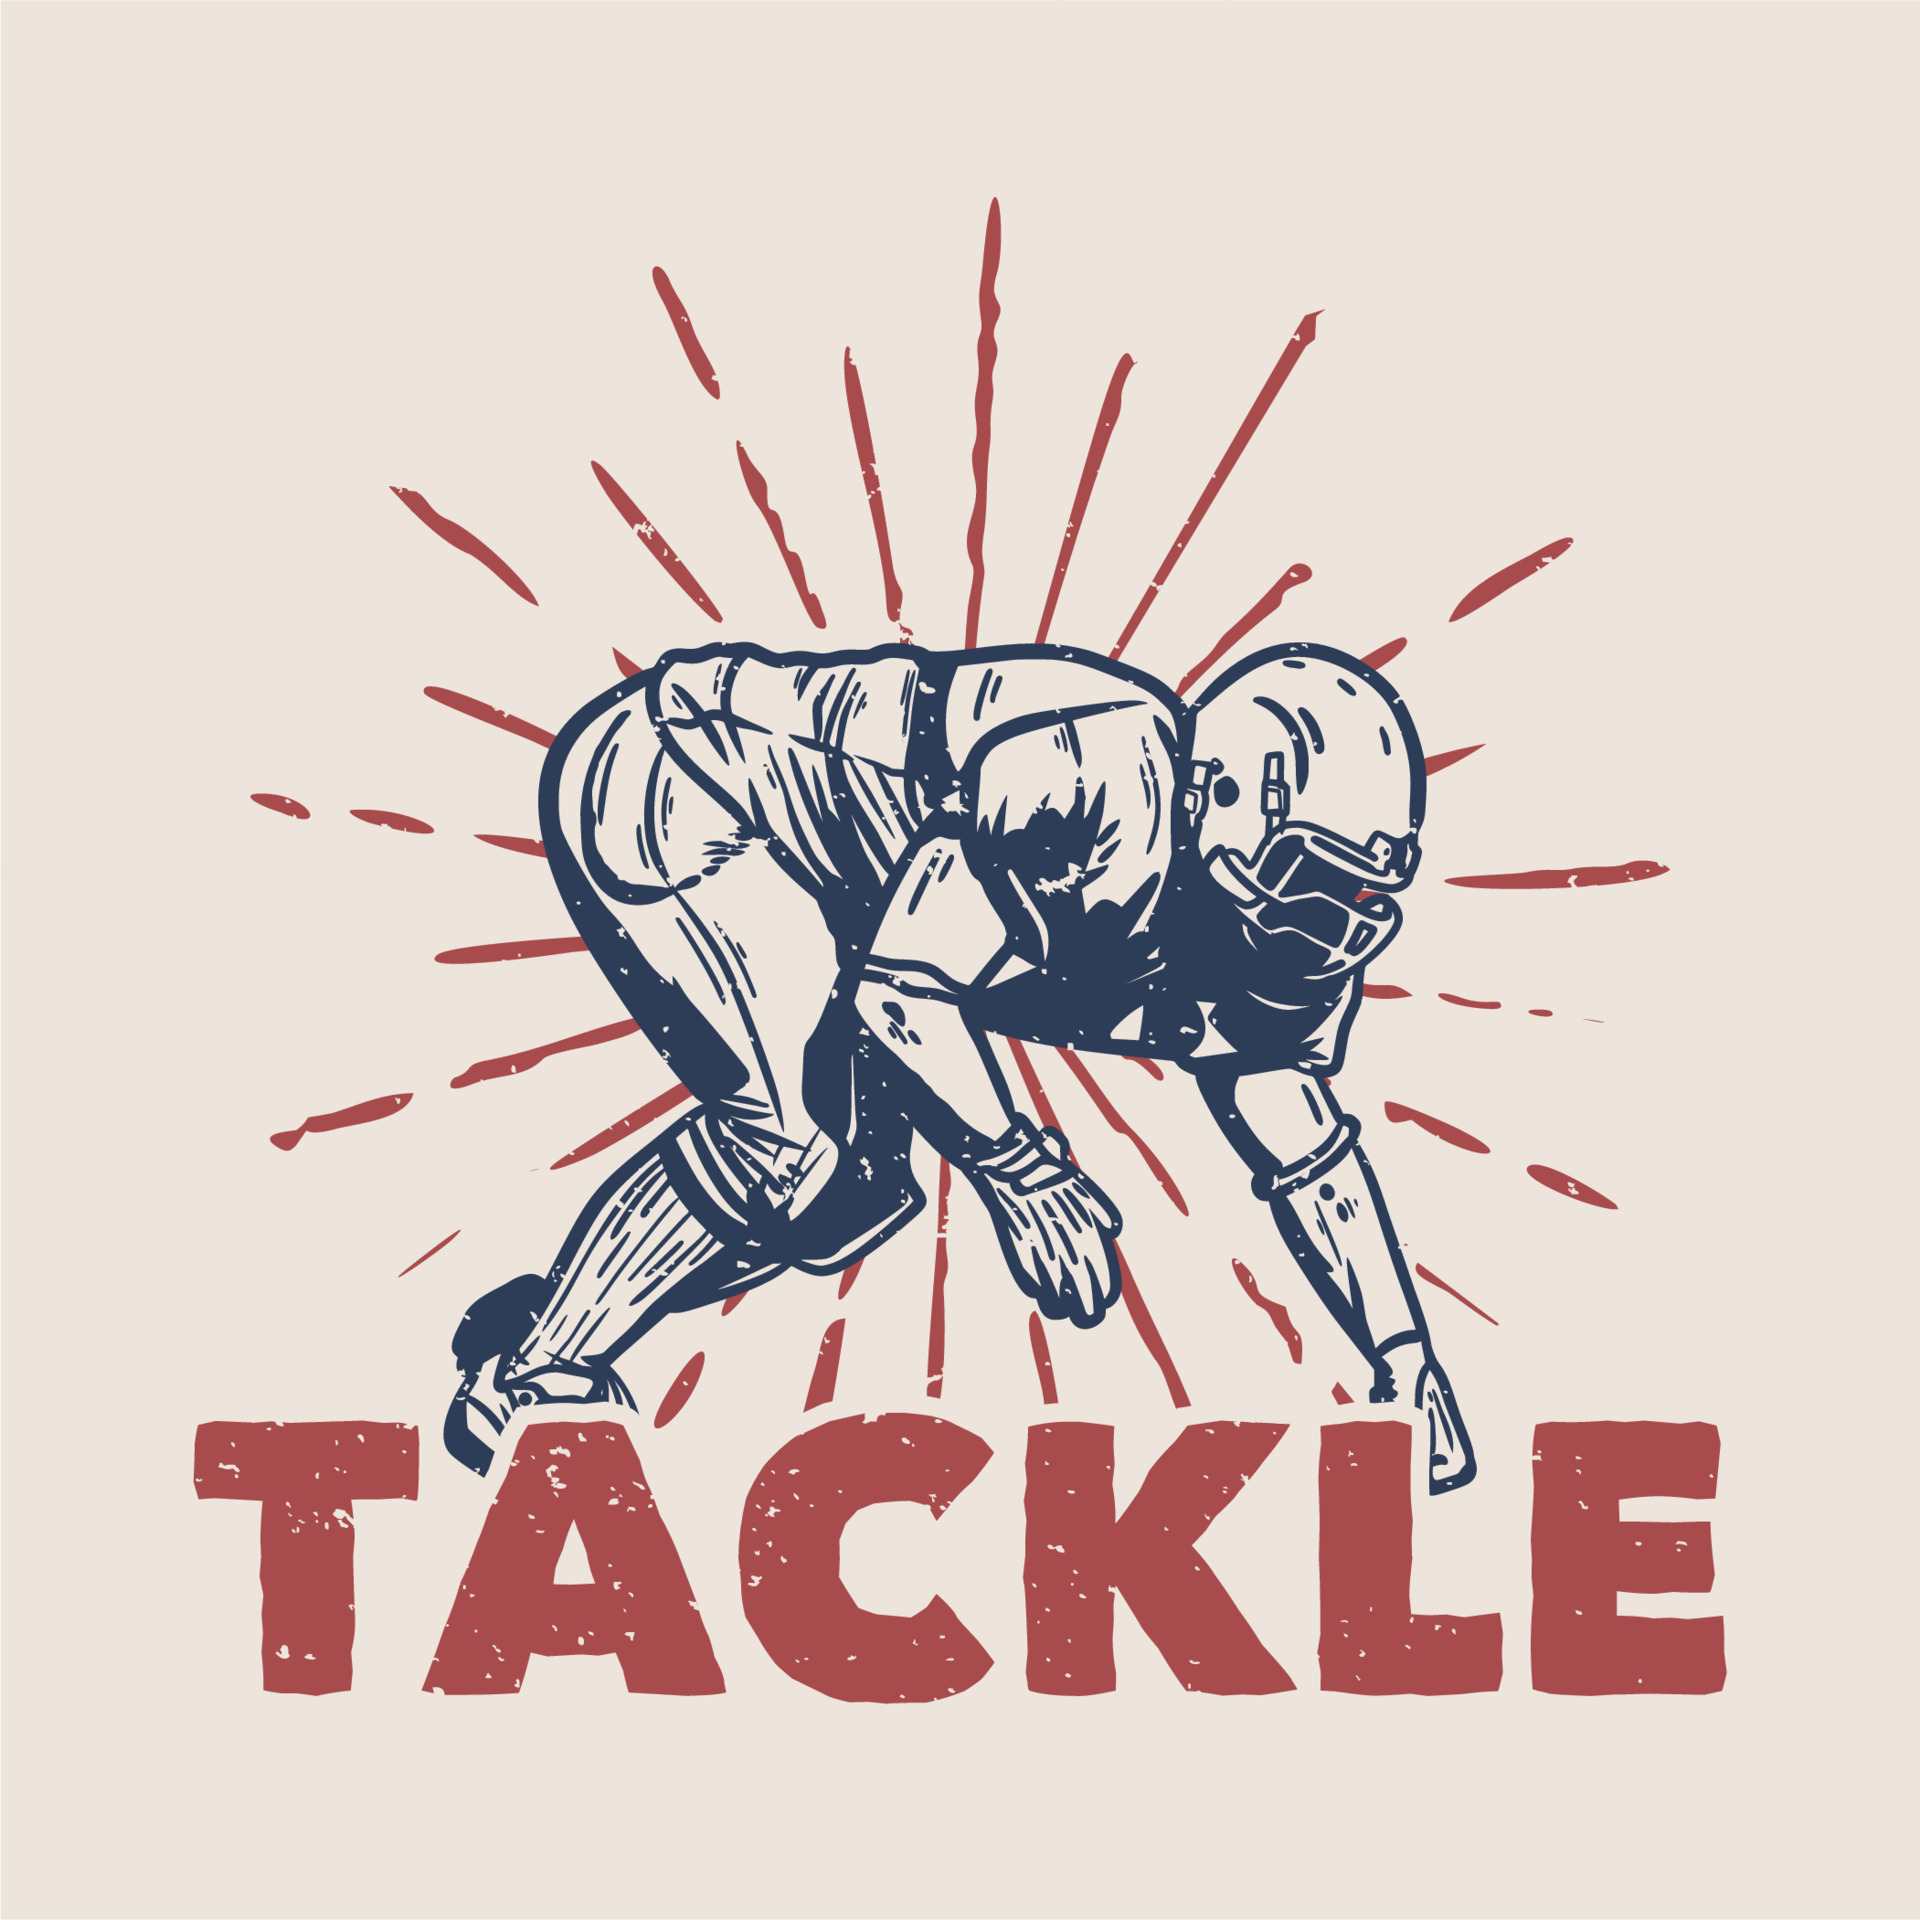 t shirt design tackle with football player doing tackle position ...